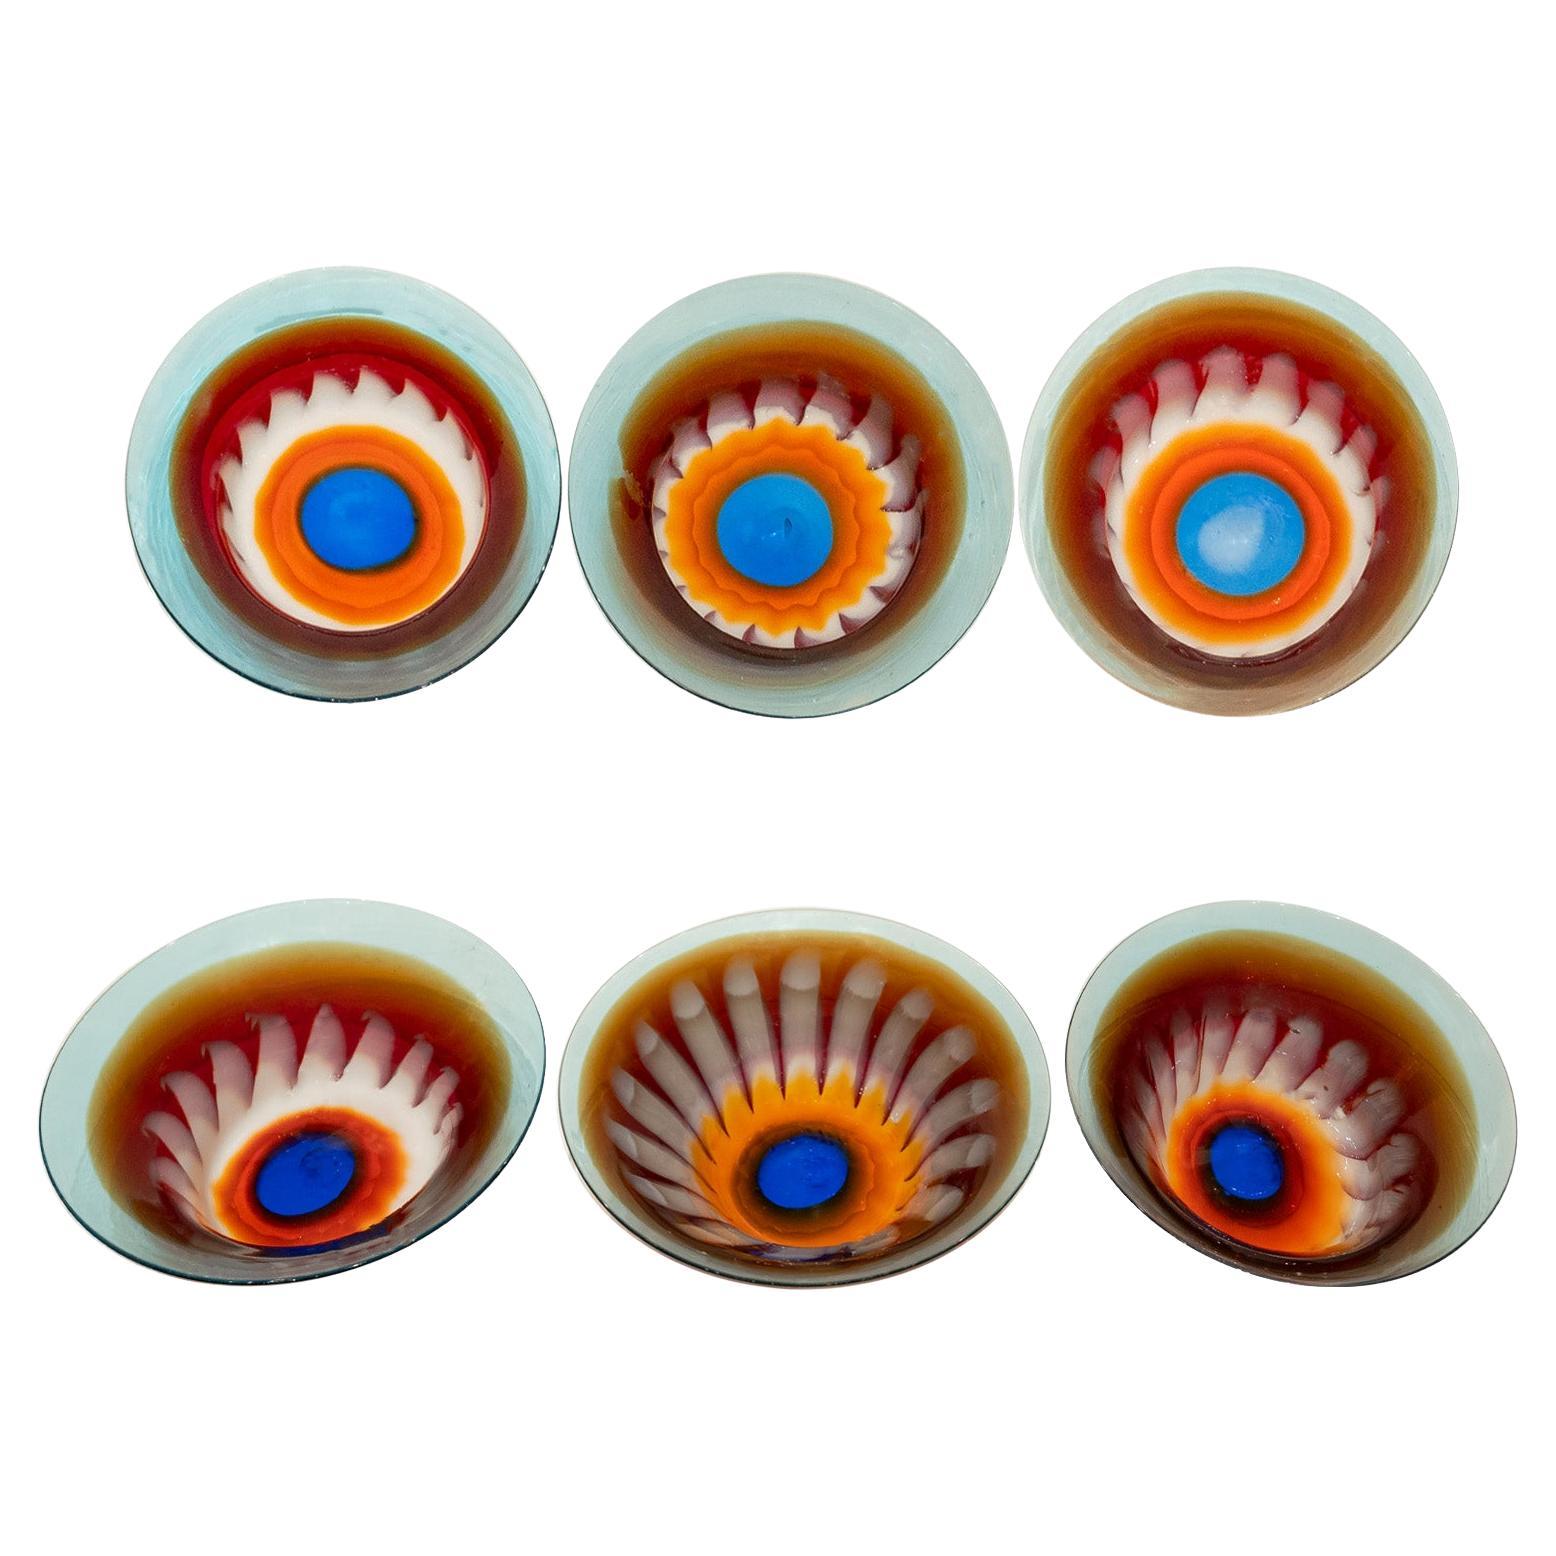 Anzolo Fuga Rare Set of 11 Hand-Blown Astrale Plates/Bowls Early-1960s